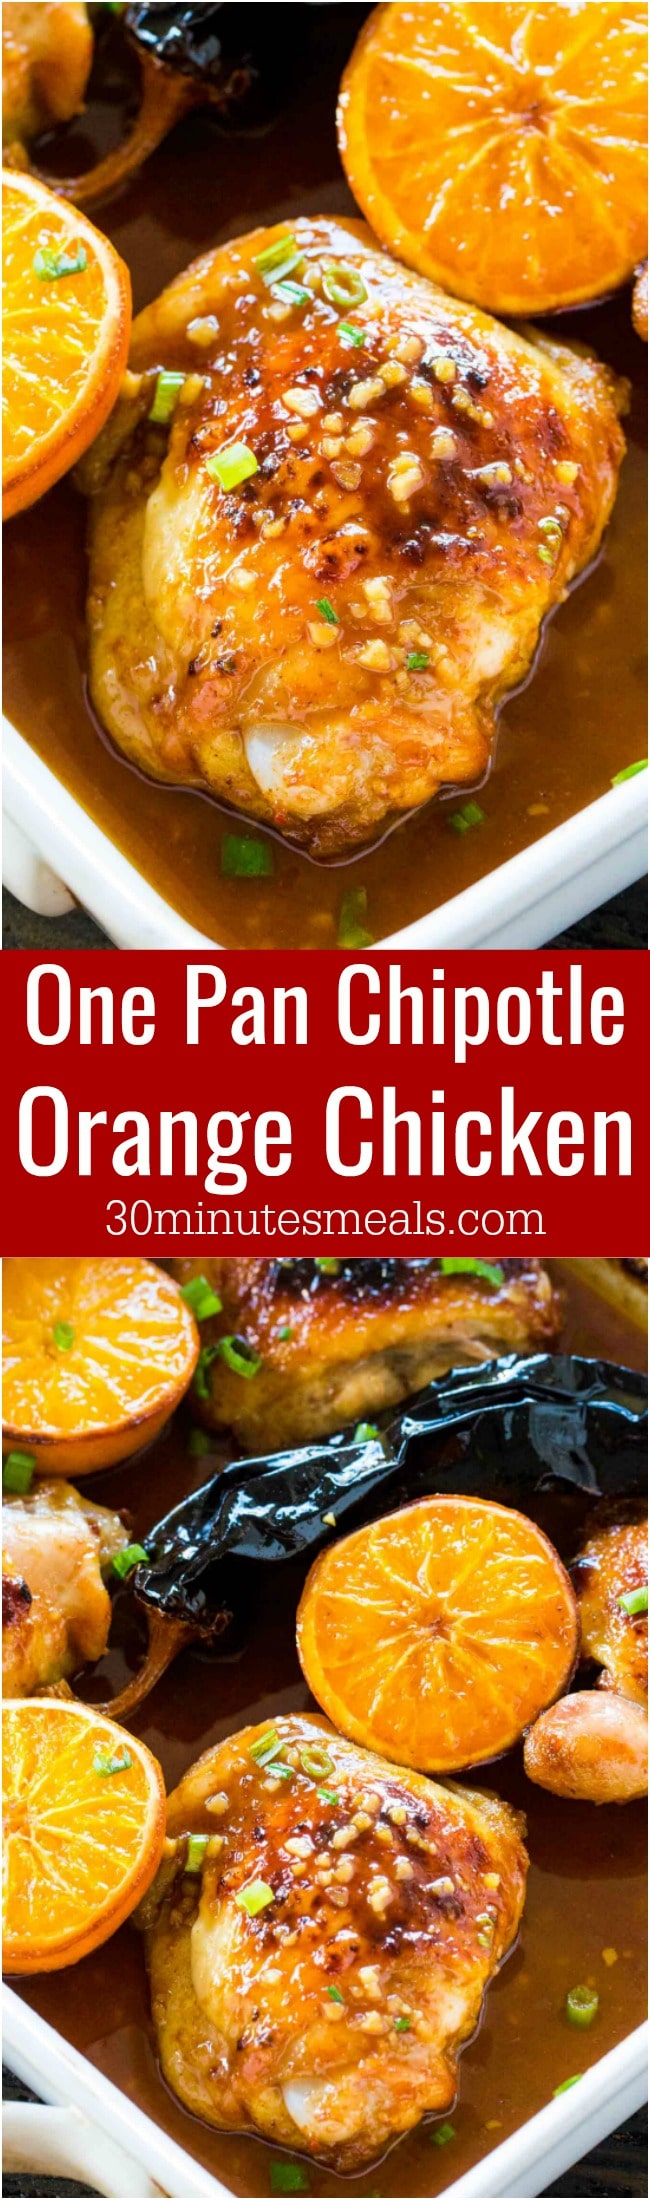 Chipotle Orange Chicken is sweet, spicy, crispy on the outside and tender on the inside. Easily made in one pan in just 30 minutes.